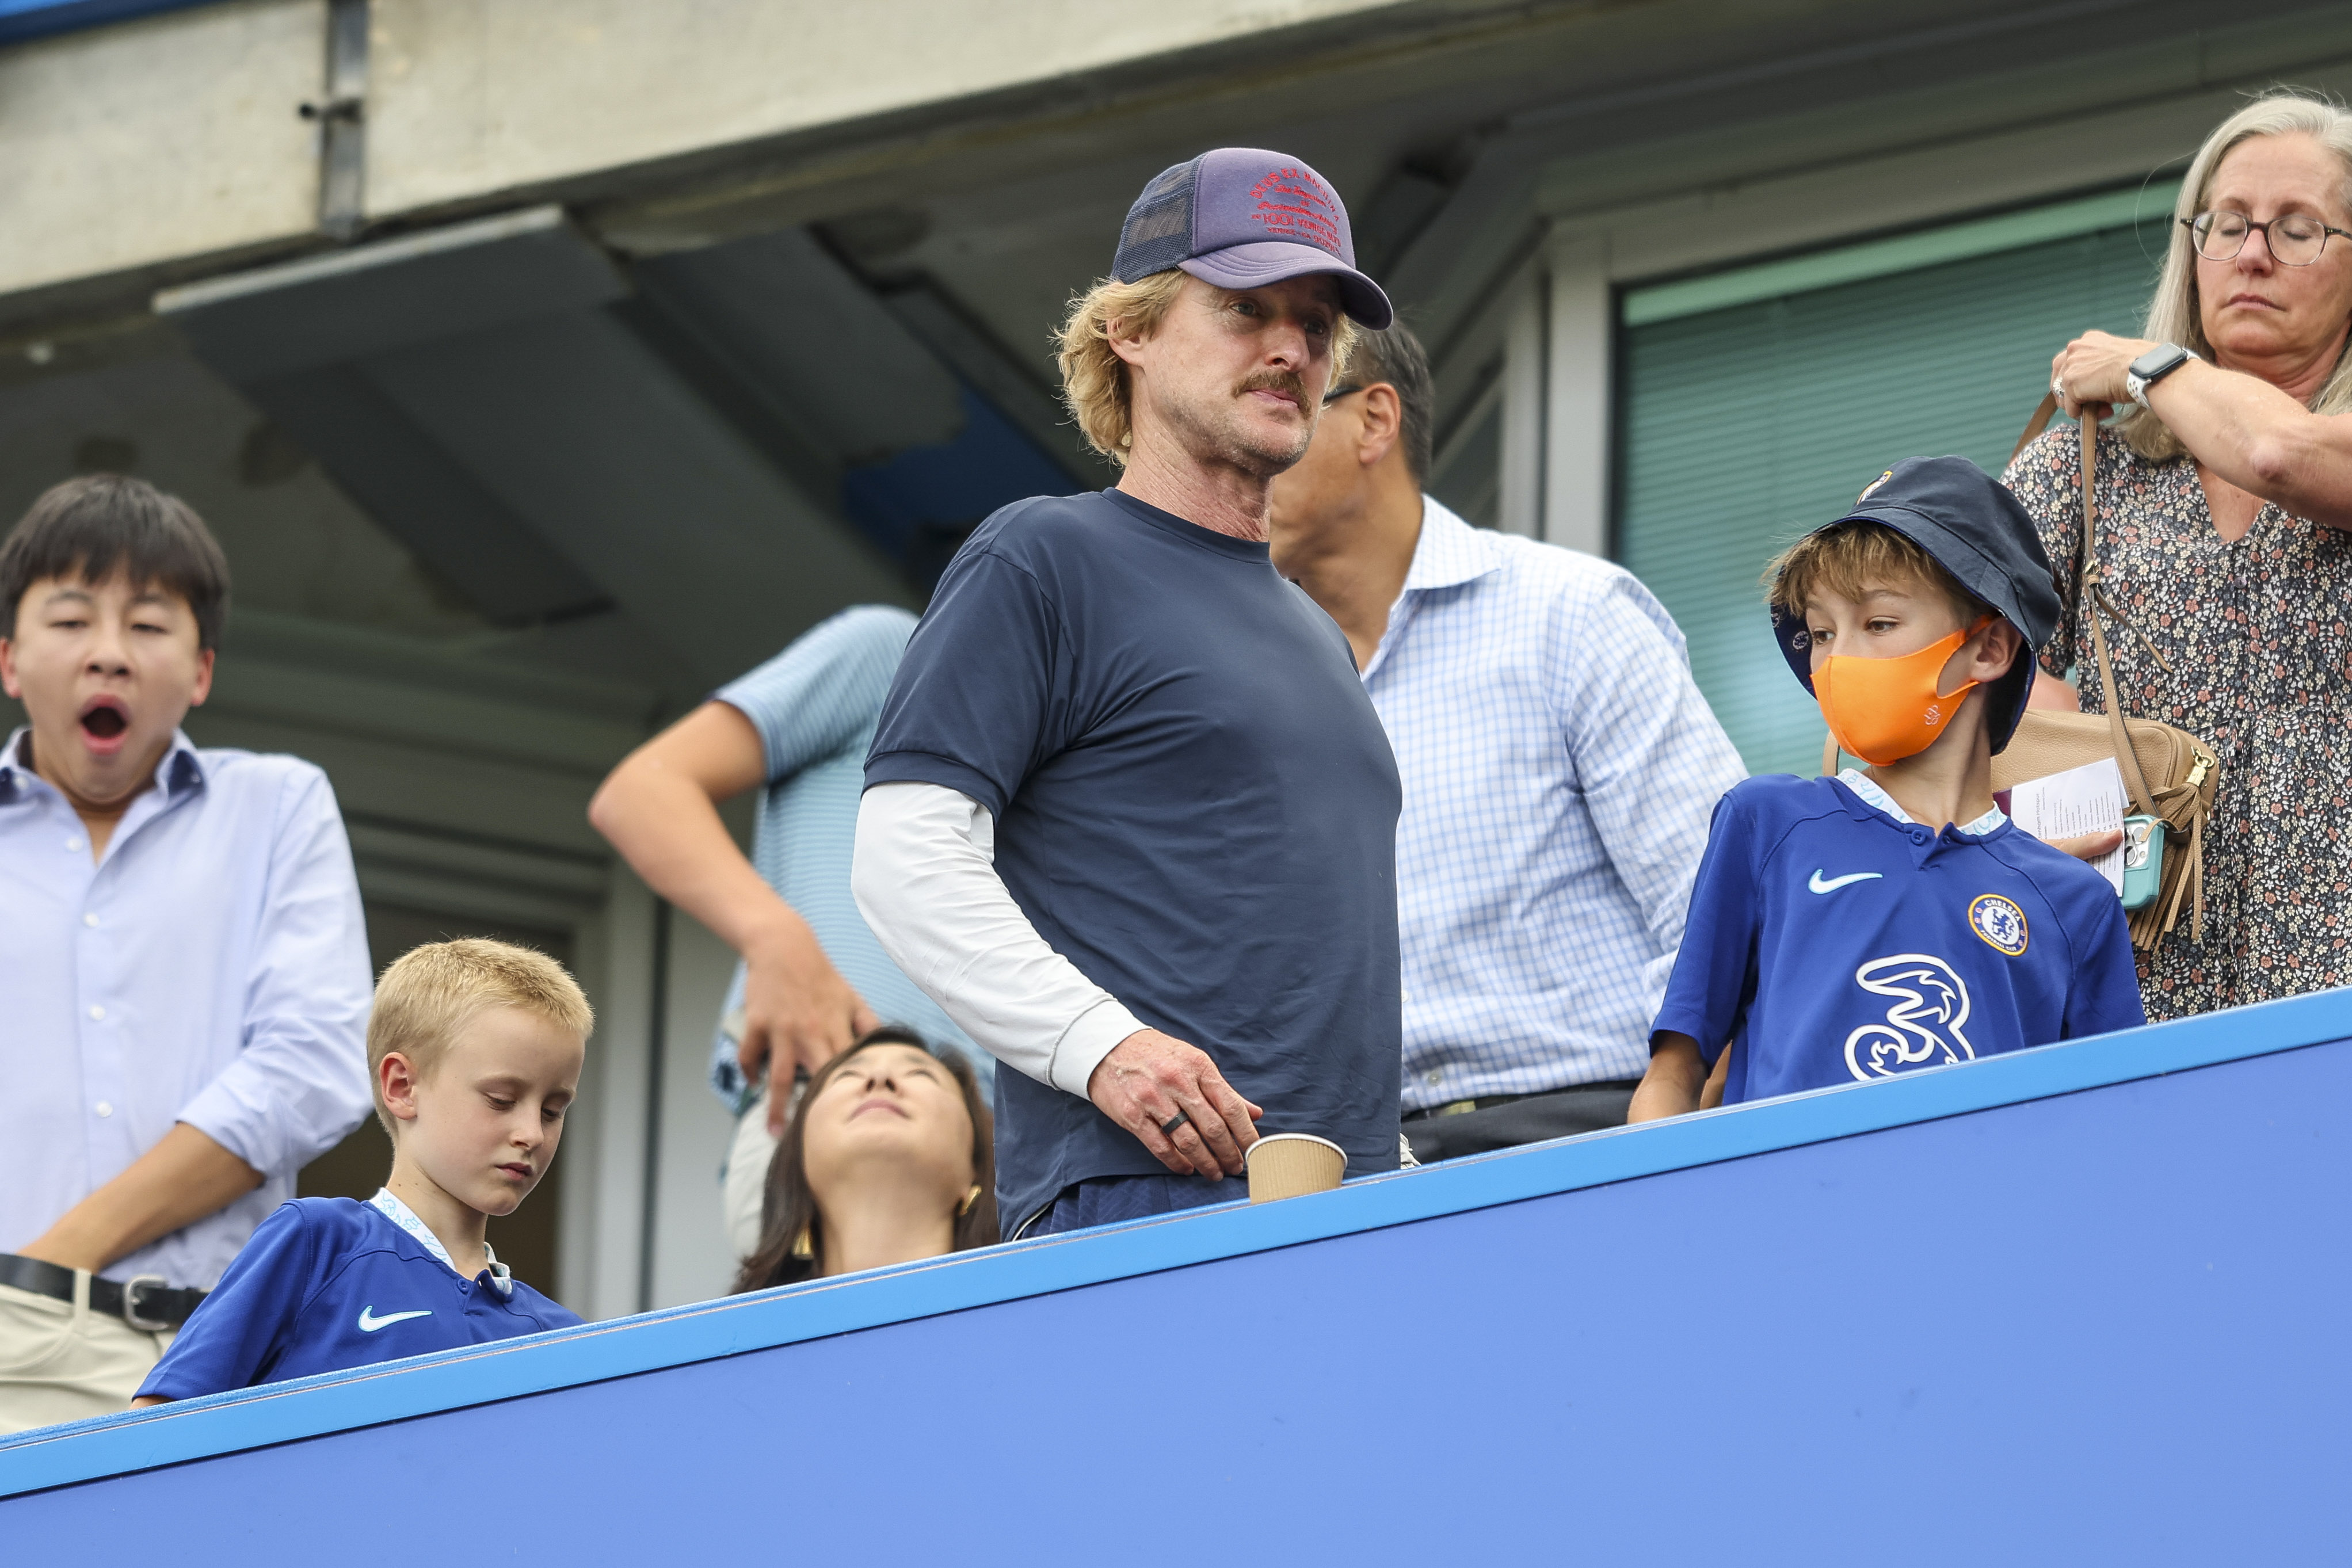 Hollywood actor Owen Wilson at Stamford Bridge on August 14, 2022, in London, England | Source: Getty Images